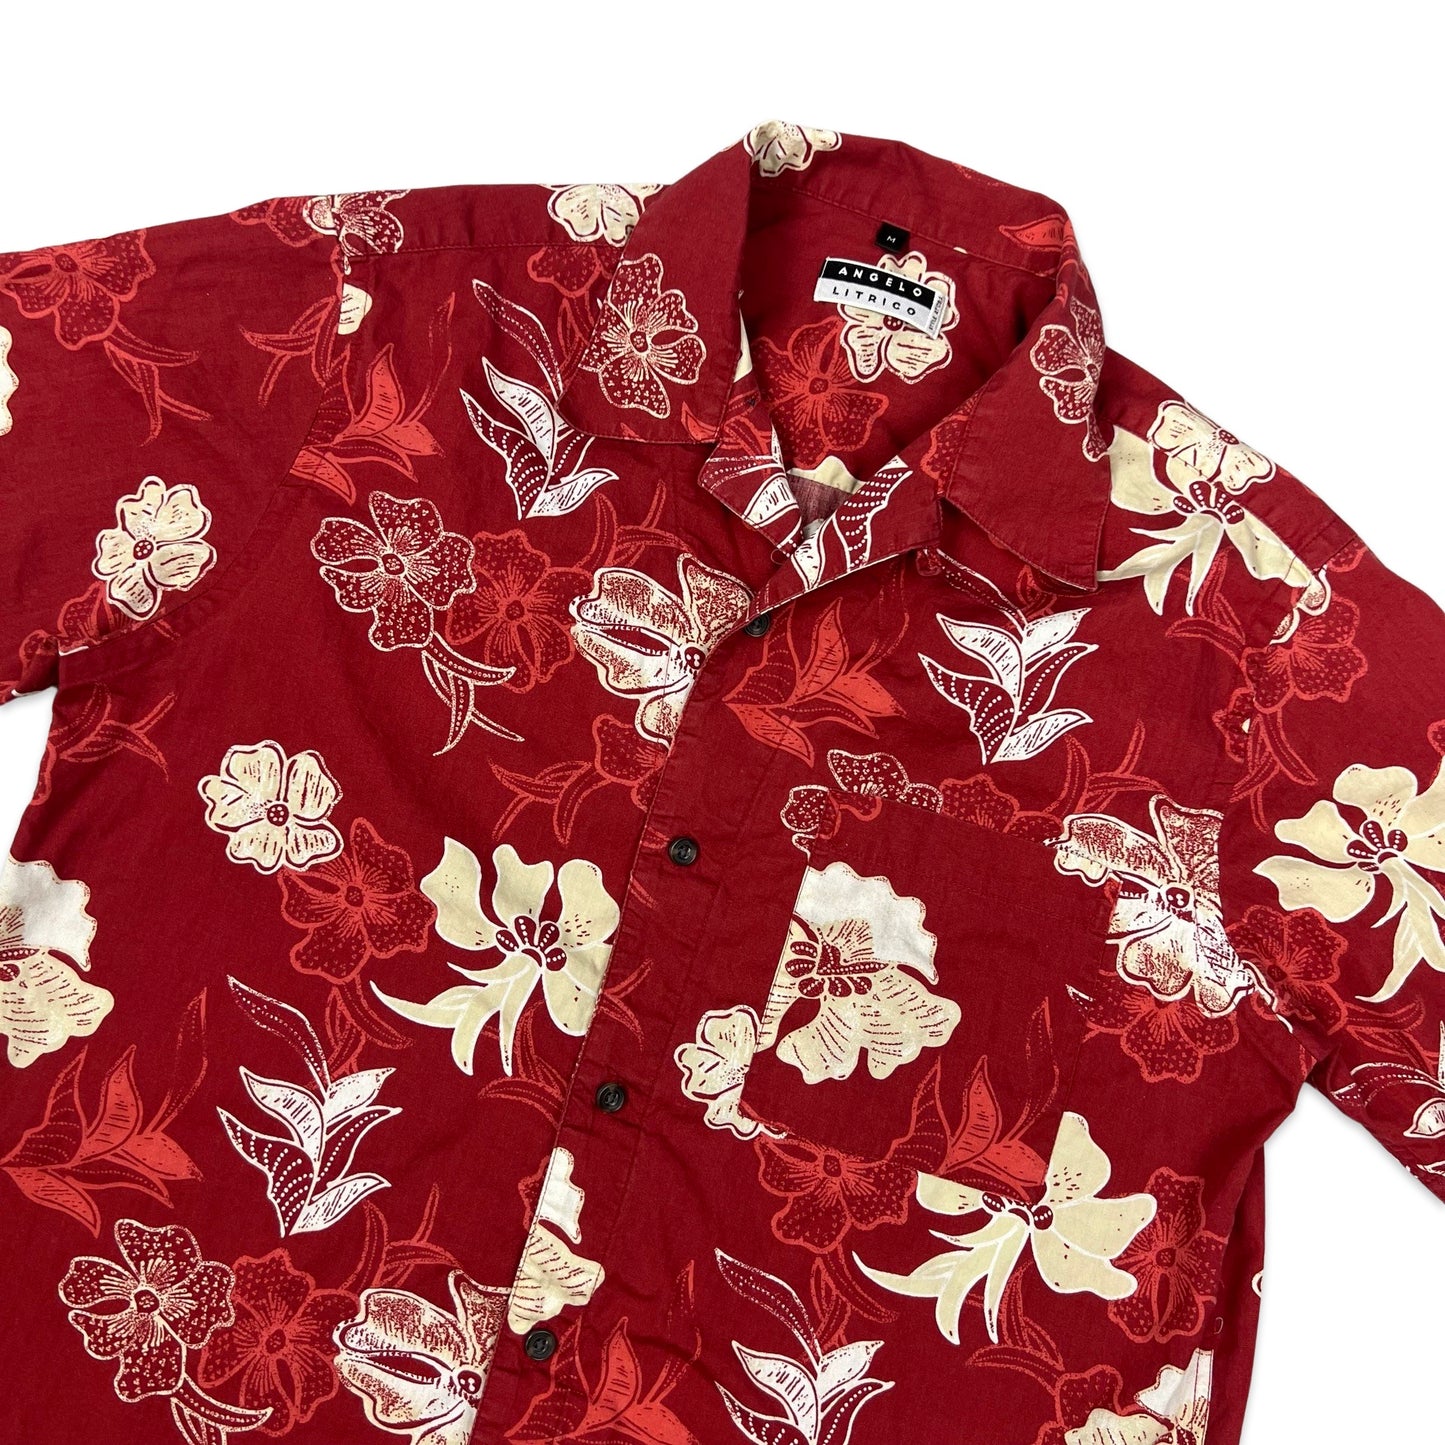 Vintage Angelo Litrico Red & White Floral Print Hawaiian Shirt S M